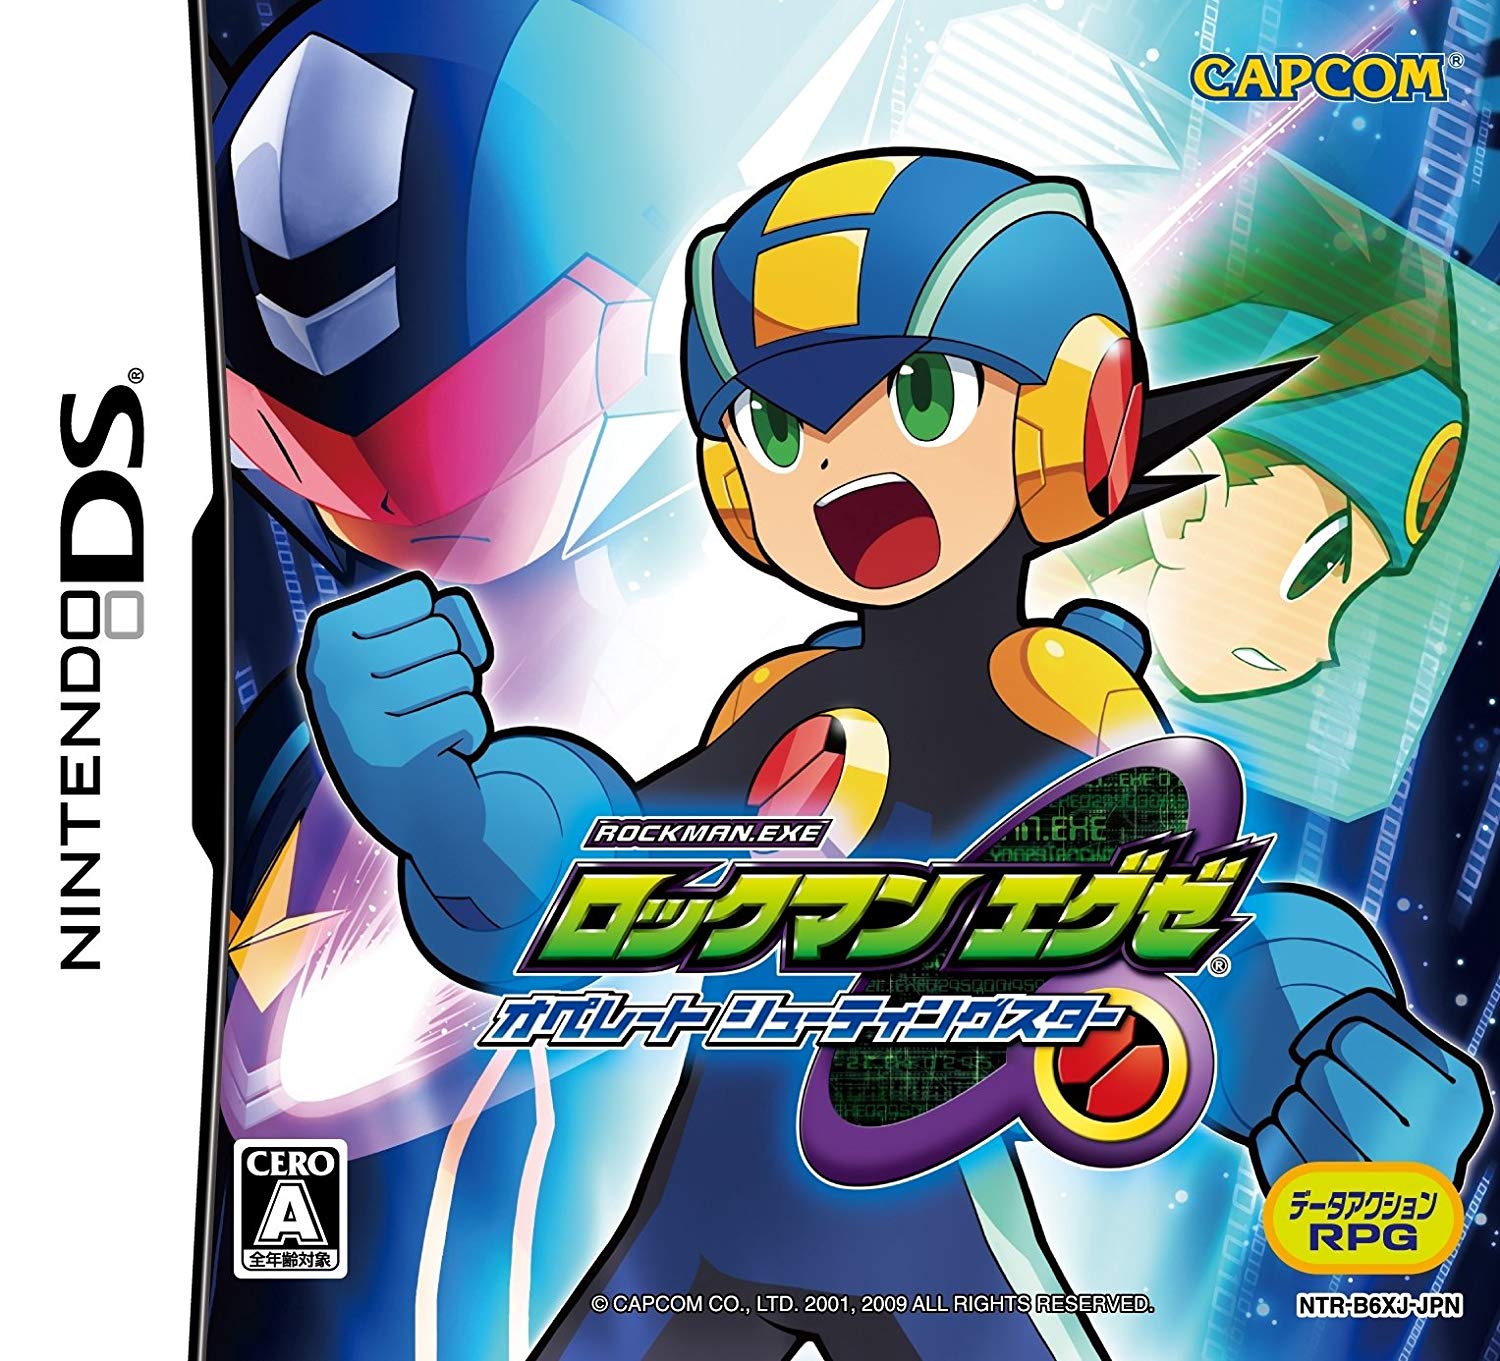 Rockman Exe Operate Shooting Star English Patched Rom Ds Nostalgialand